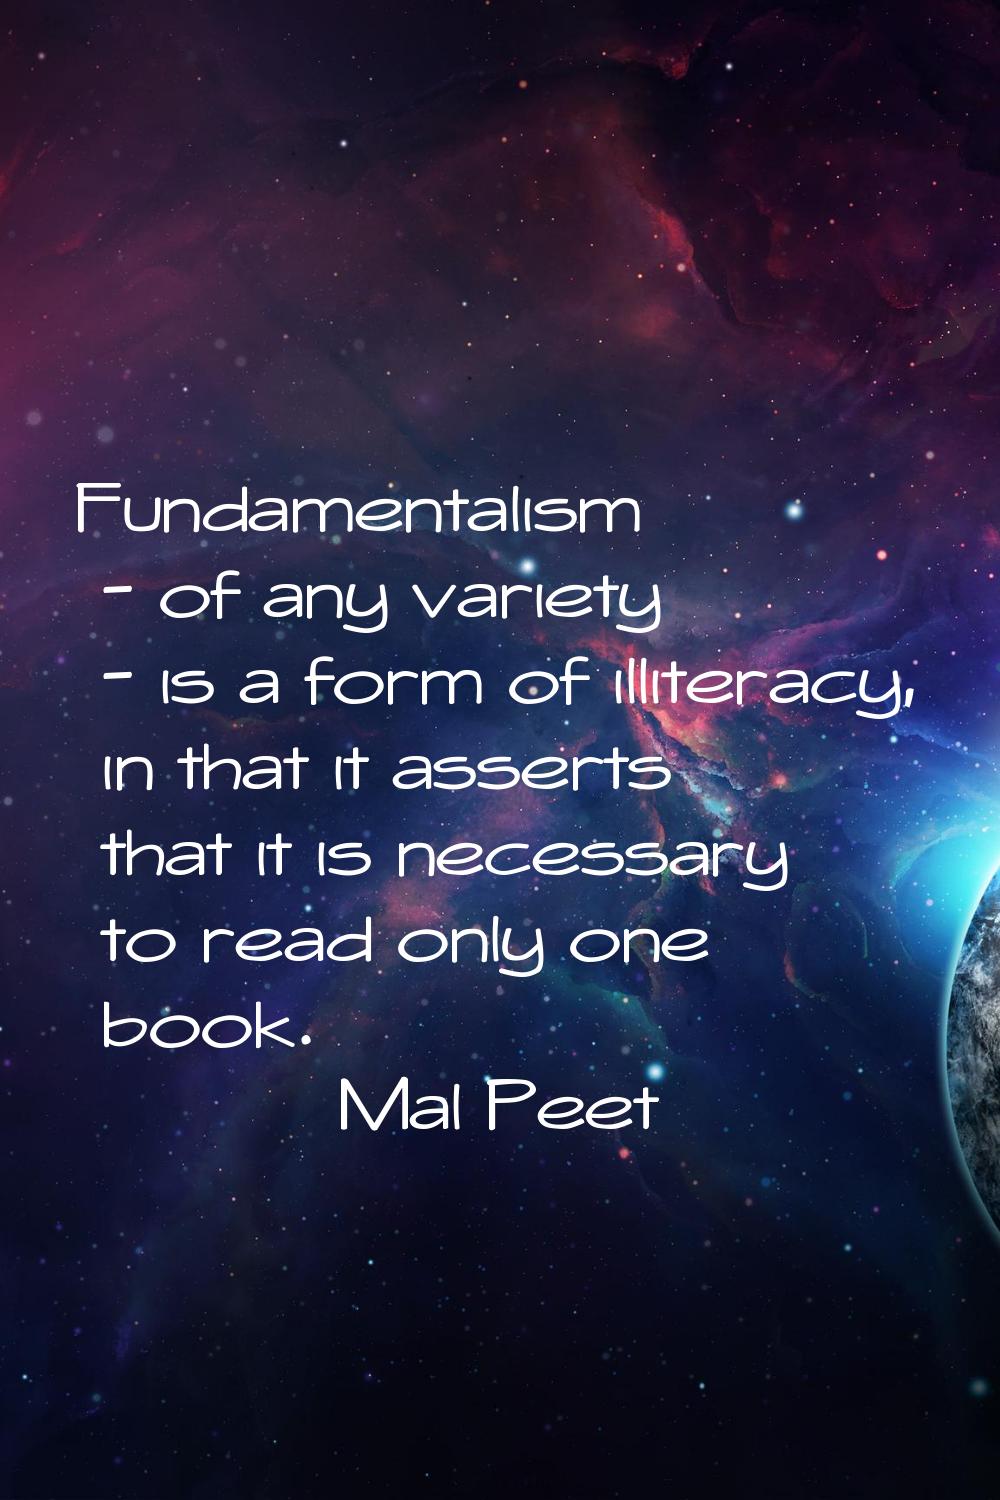 Fundamentalism - of any variety - is a form of illiteracy, in that it asserts that it is necessary 